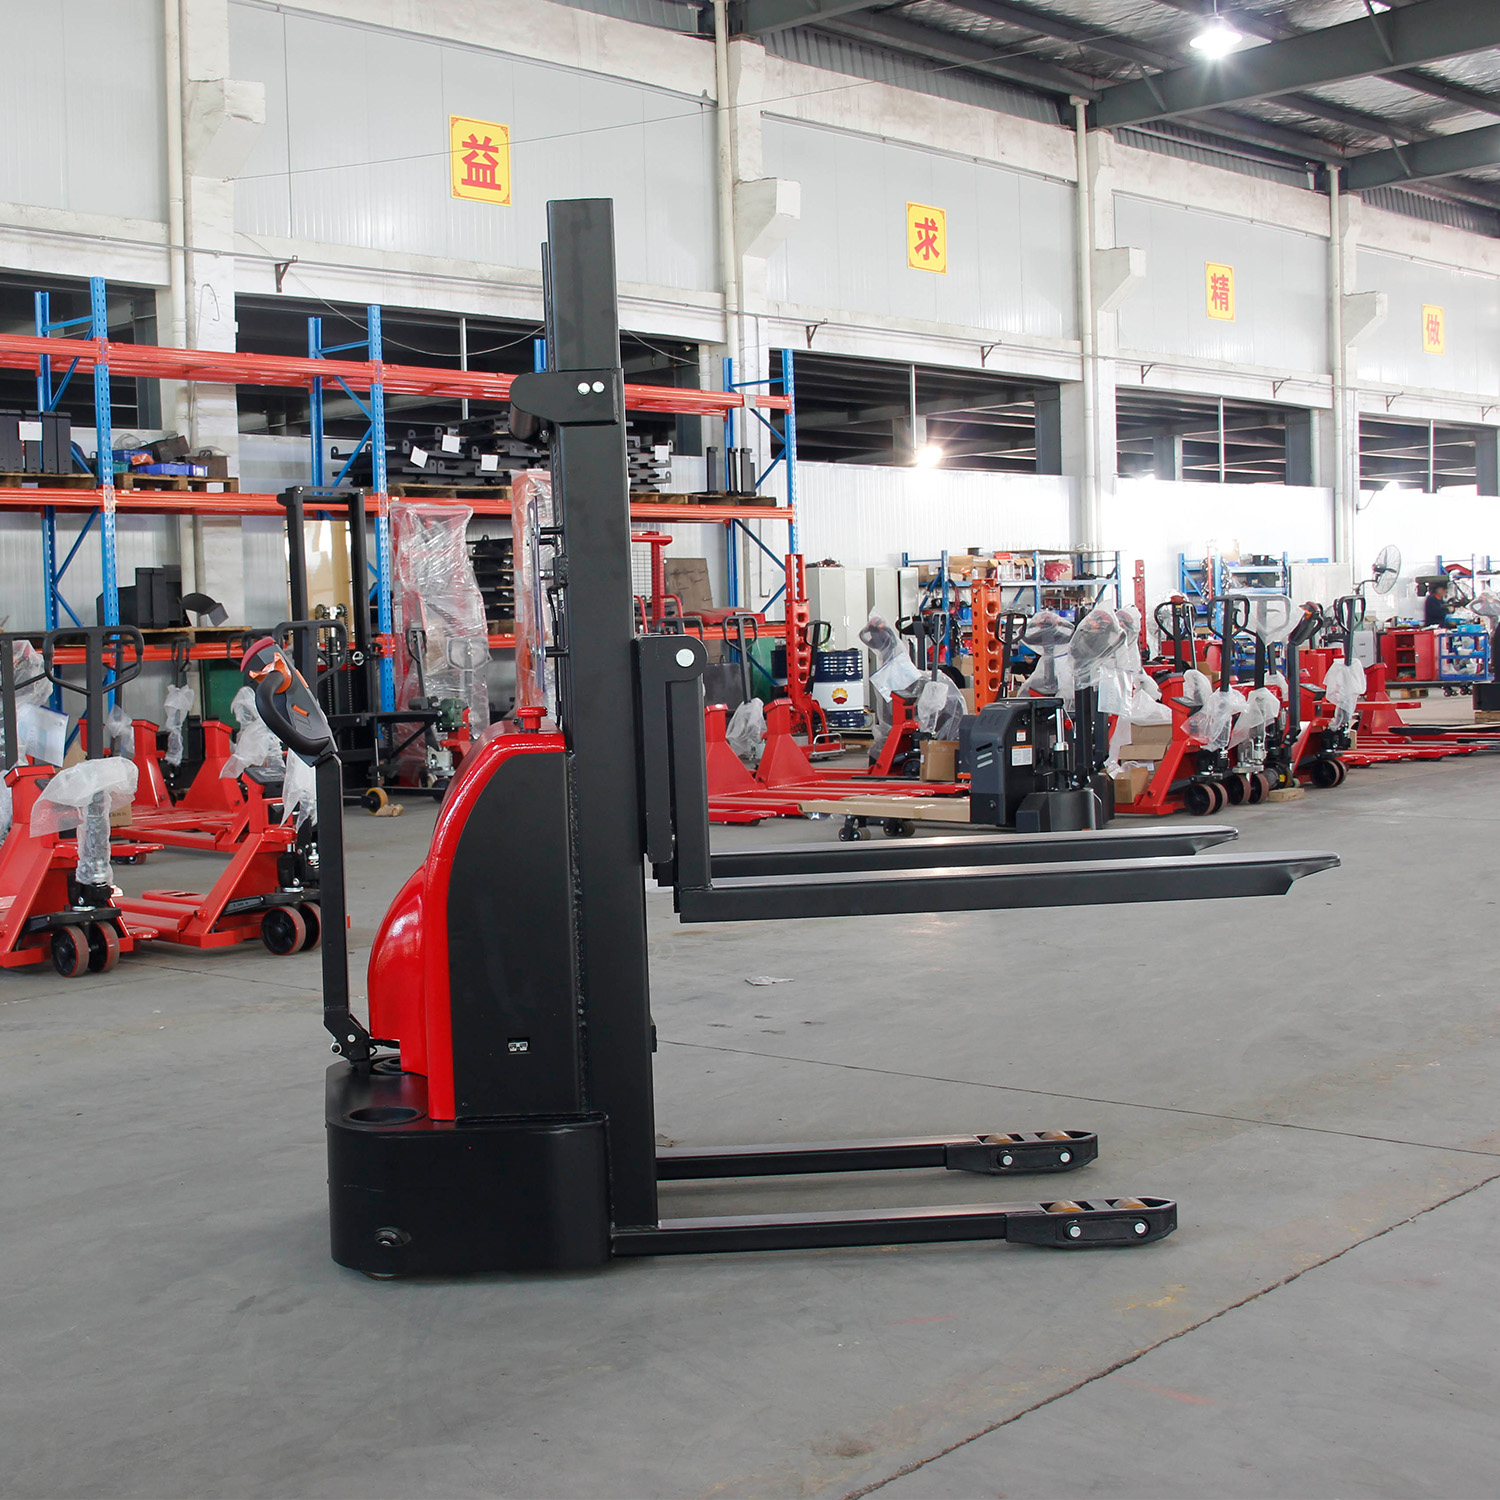 VISION Full Electric Stacker Walkie Type Electric Pallet Forklift Stacker 1.5t Capacity 3.5m Lifting Height